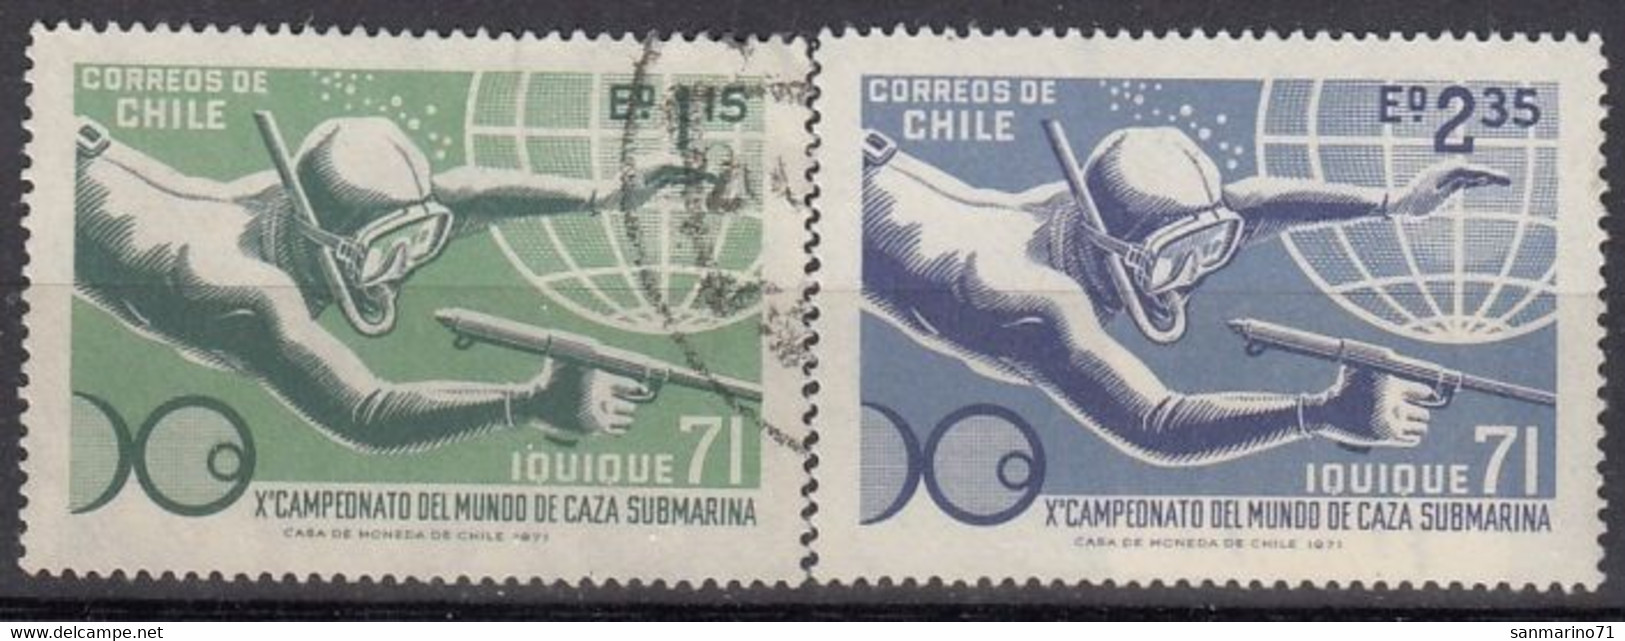 CHILE 756-757,used - Tauchen